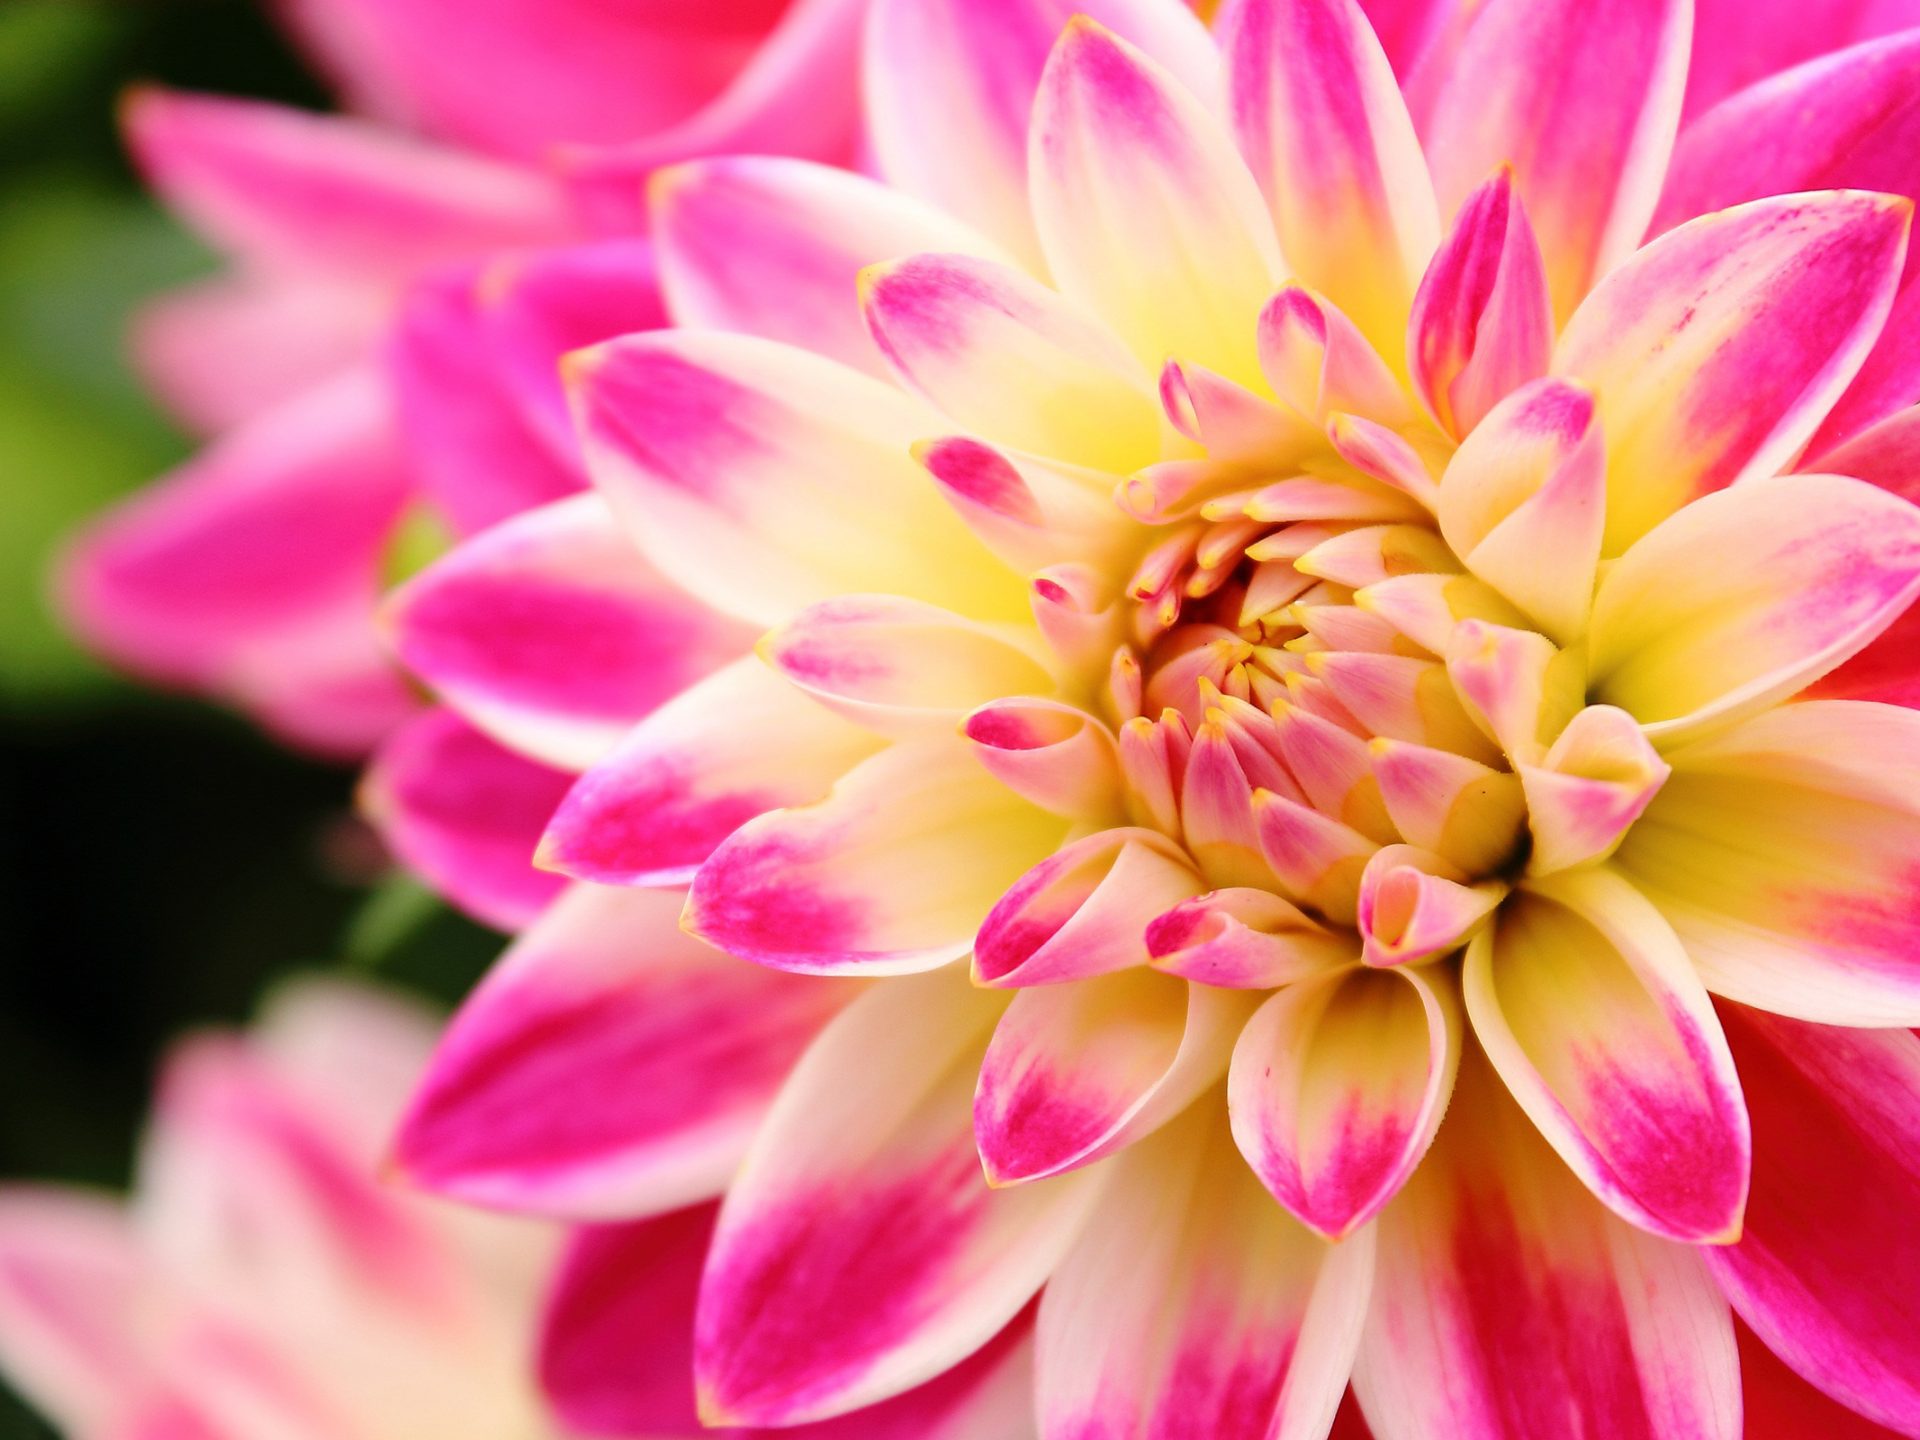 Flower In Three Colours Pink Dahlia White And Yellow HD Wallpaper For Mobile Phones And Pc 2560x1600, Wallpaper13.com